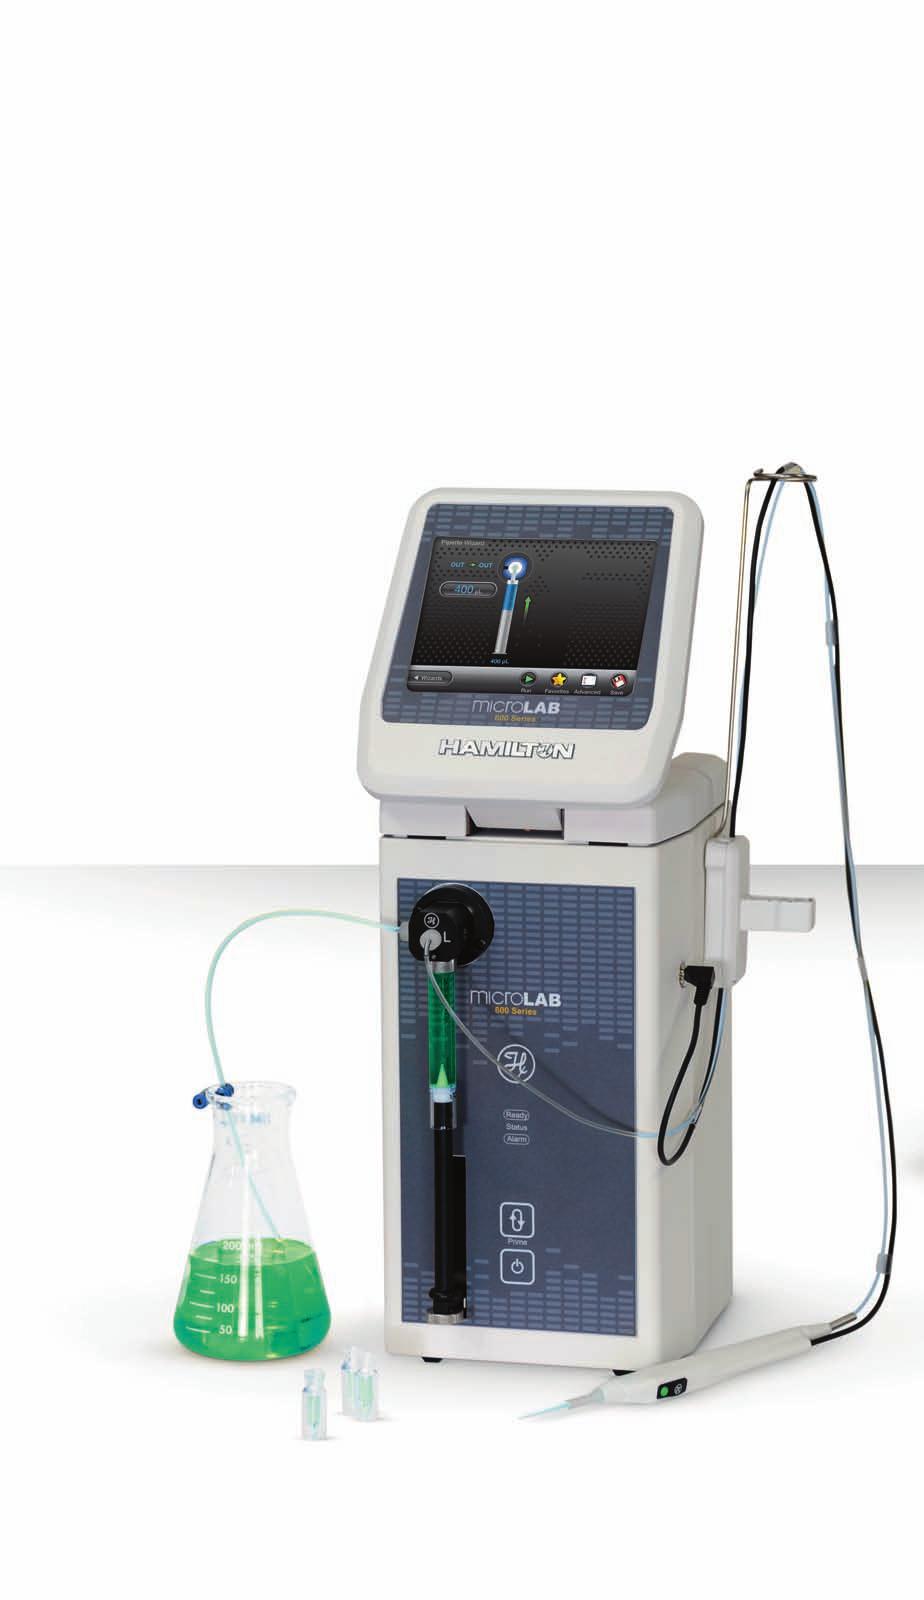 Dispenser The MICROLAB 600 Single Syringe Dispenser is able to dispense volumes from 100 nl to 50 ml.